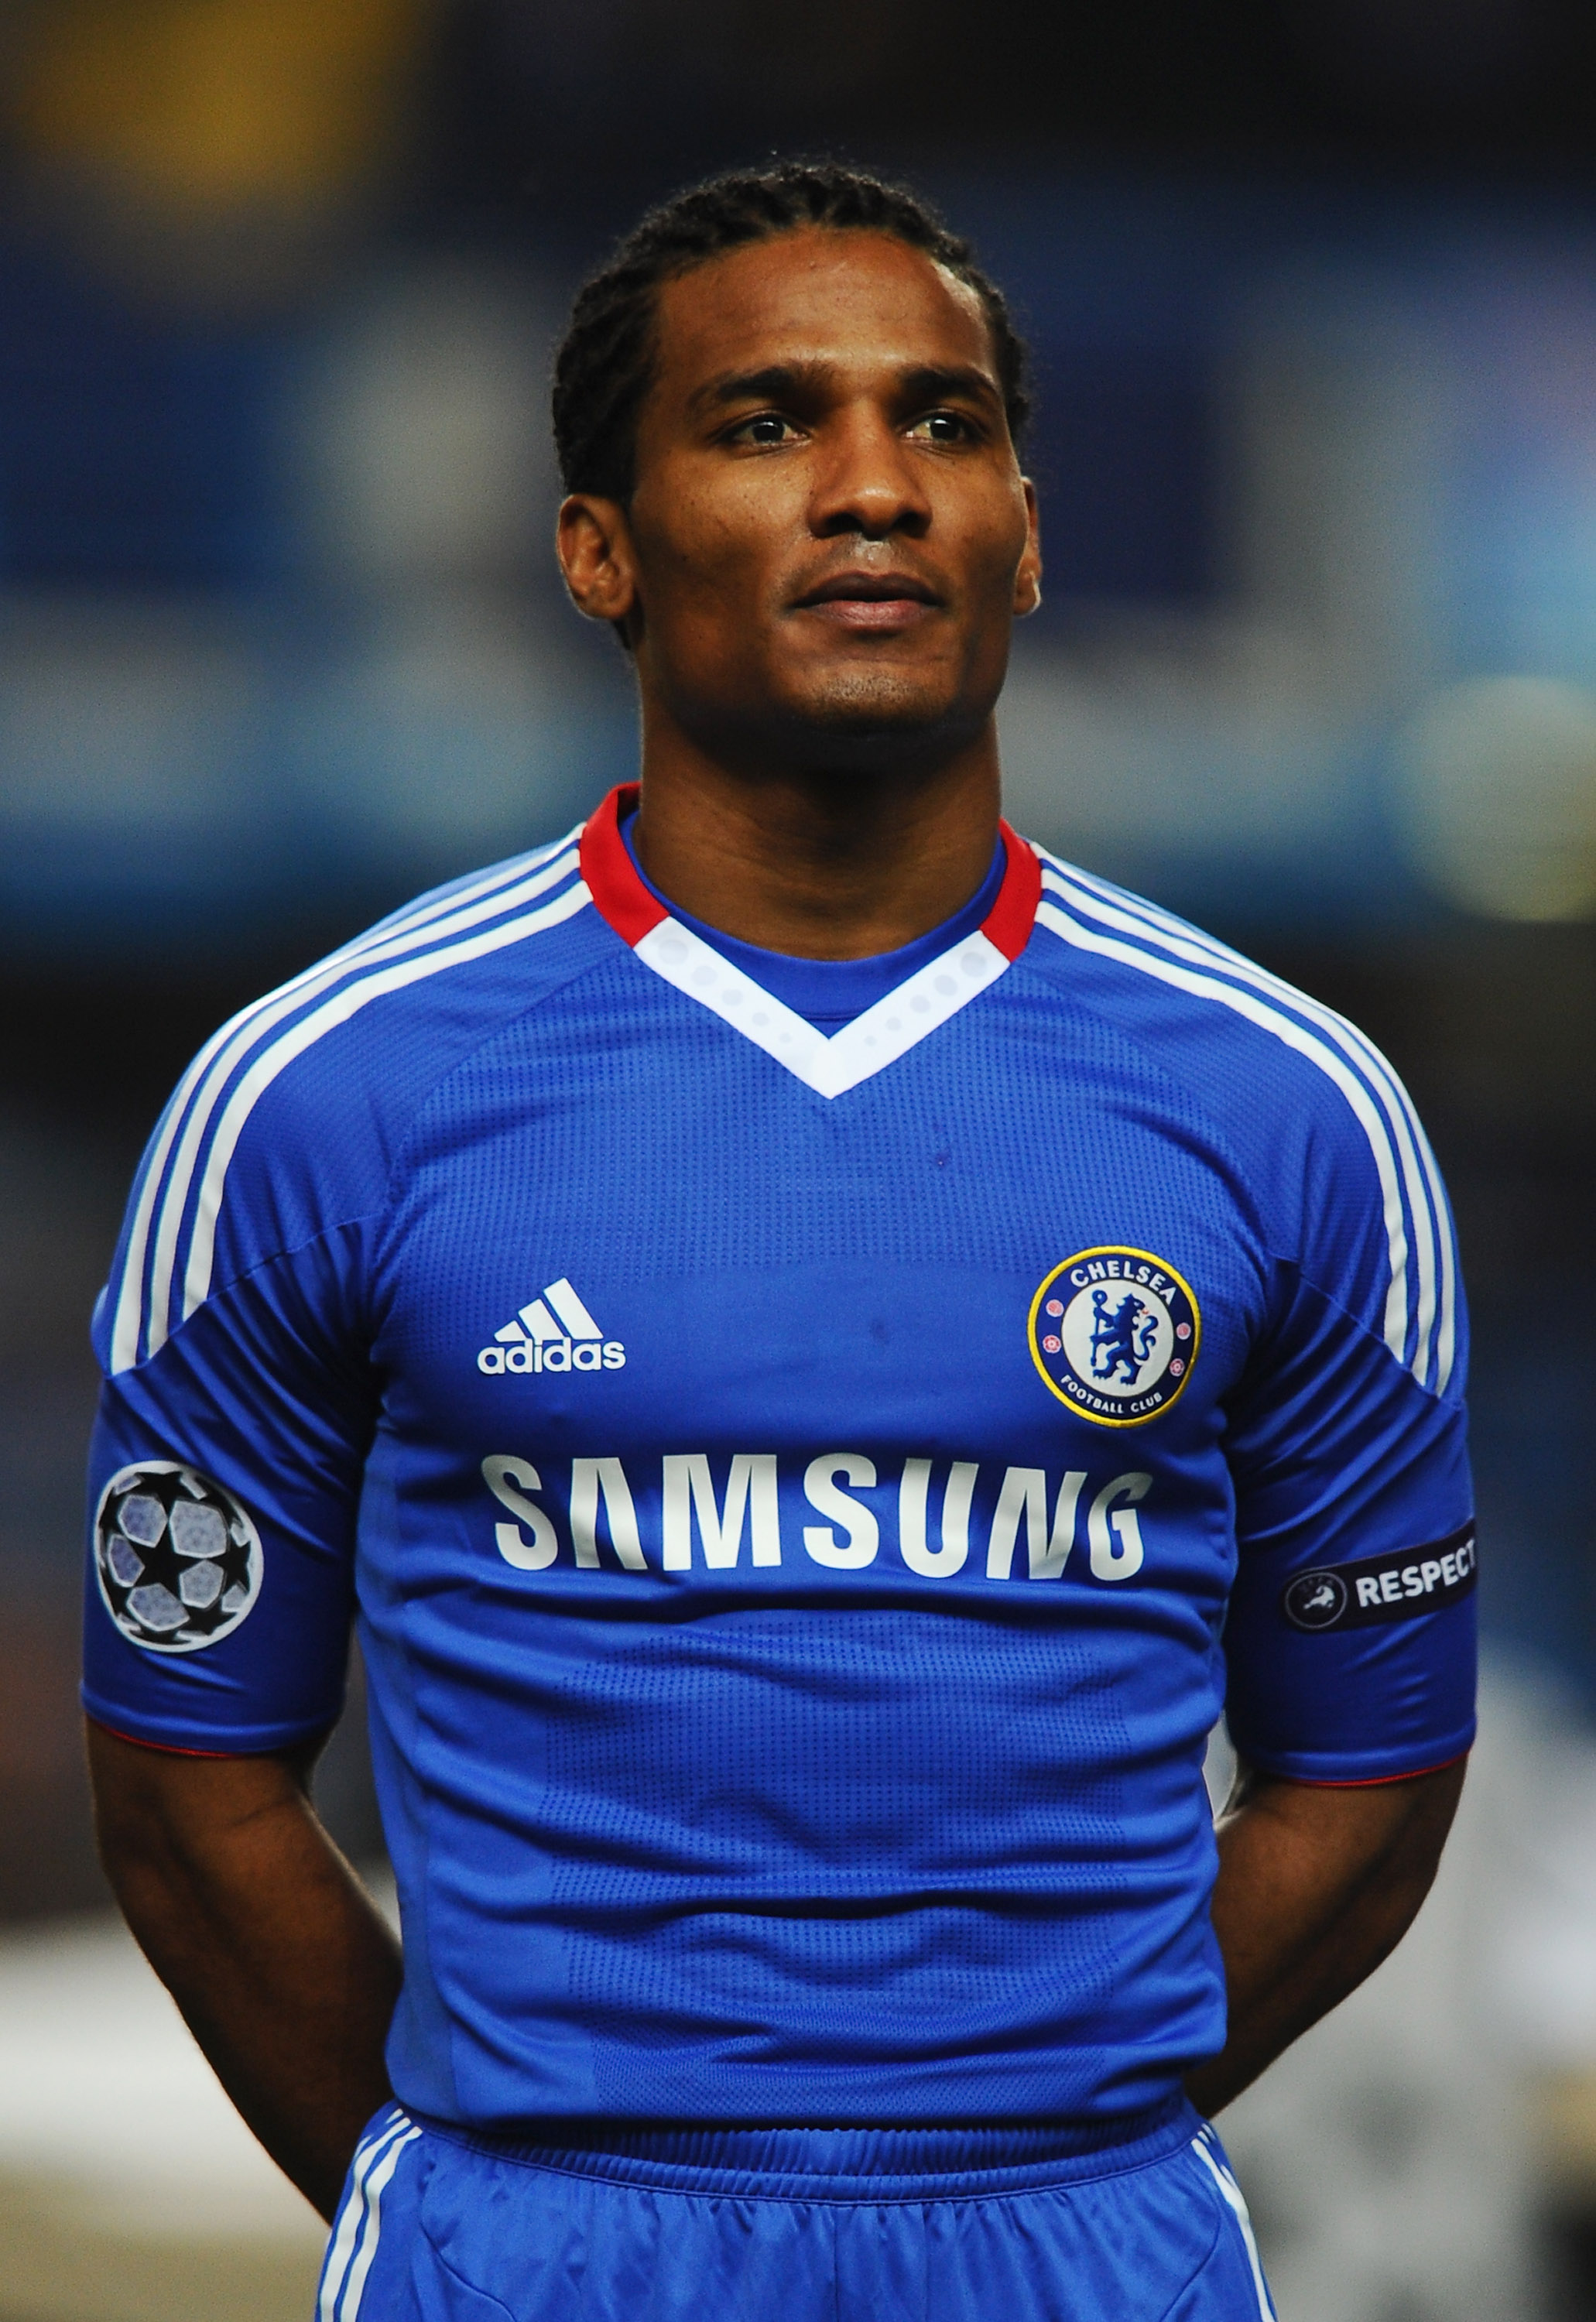 LONDON, ENGLAND - NOVEMBER 23:  Florent Malouda of Chelsea looks on during the UEFA Champions League Group F match between Chelsea and MSK Zilina at Stamford Bridge on November 23, 2010 in London, England.  (Photo by Mike Hewitt/Getty Images)